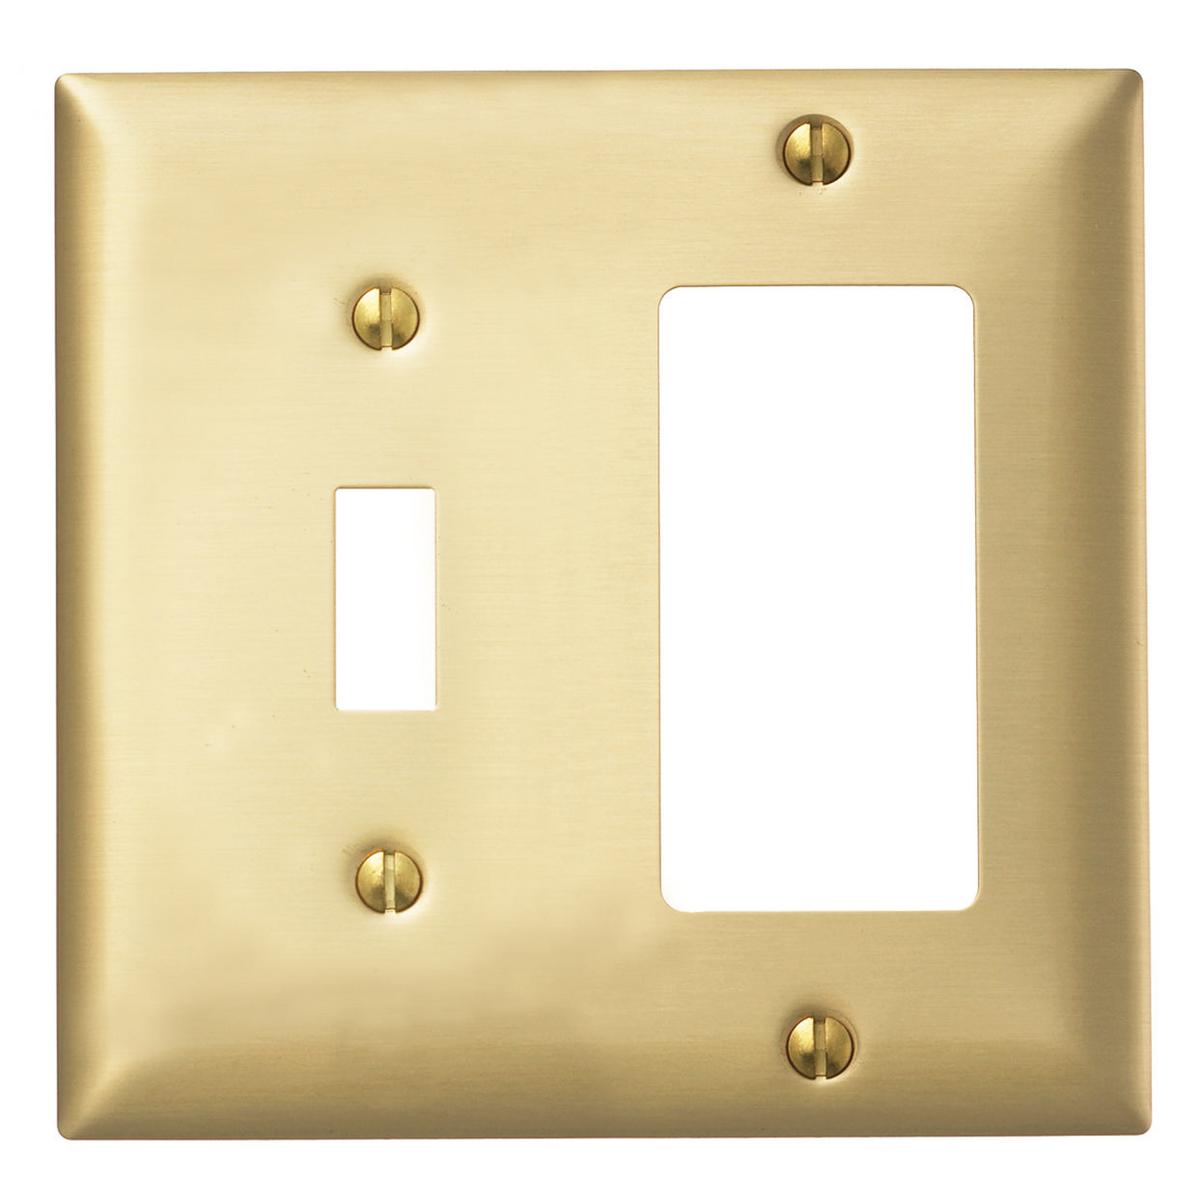 Hubbell SBP126 Wallplates and Boxes, Metallic Plates, 2- Gang, 1) Toggle Opening, 1)Decorator Opening, Standard Size, Brass Plated Steel  ; Non-magnetic and corrosion resistant ; Finish is lacquer coated to inhibit oxidation ; Protective plastic film helps to prevent sc